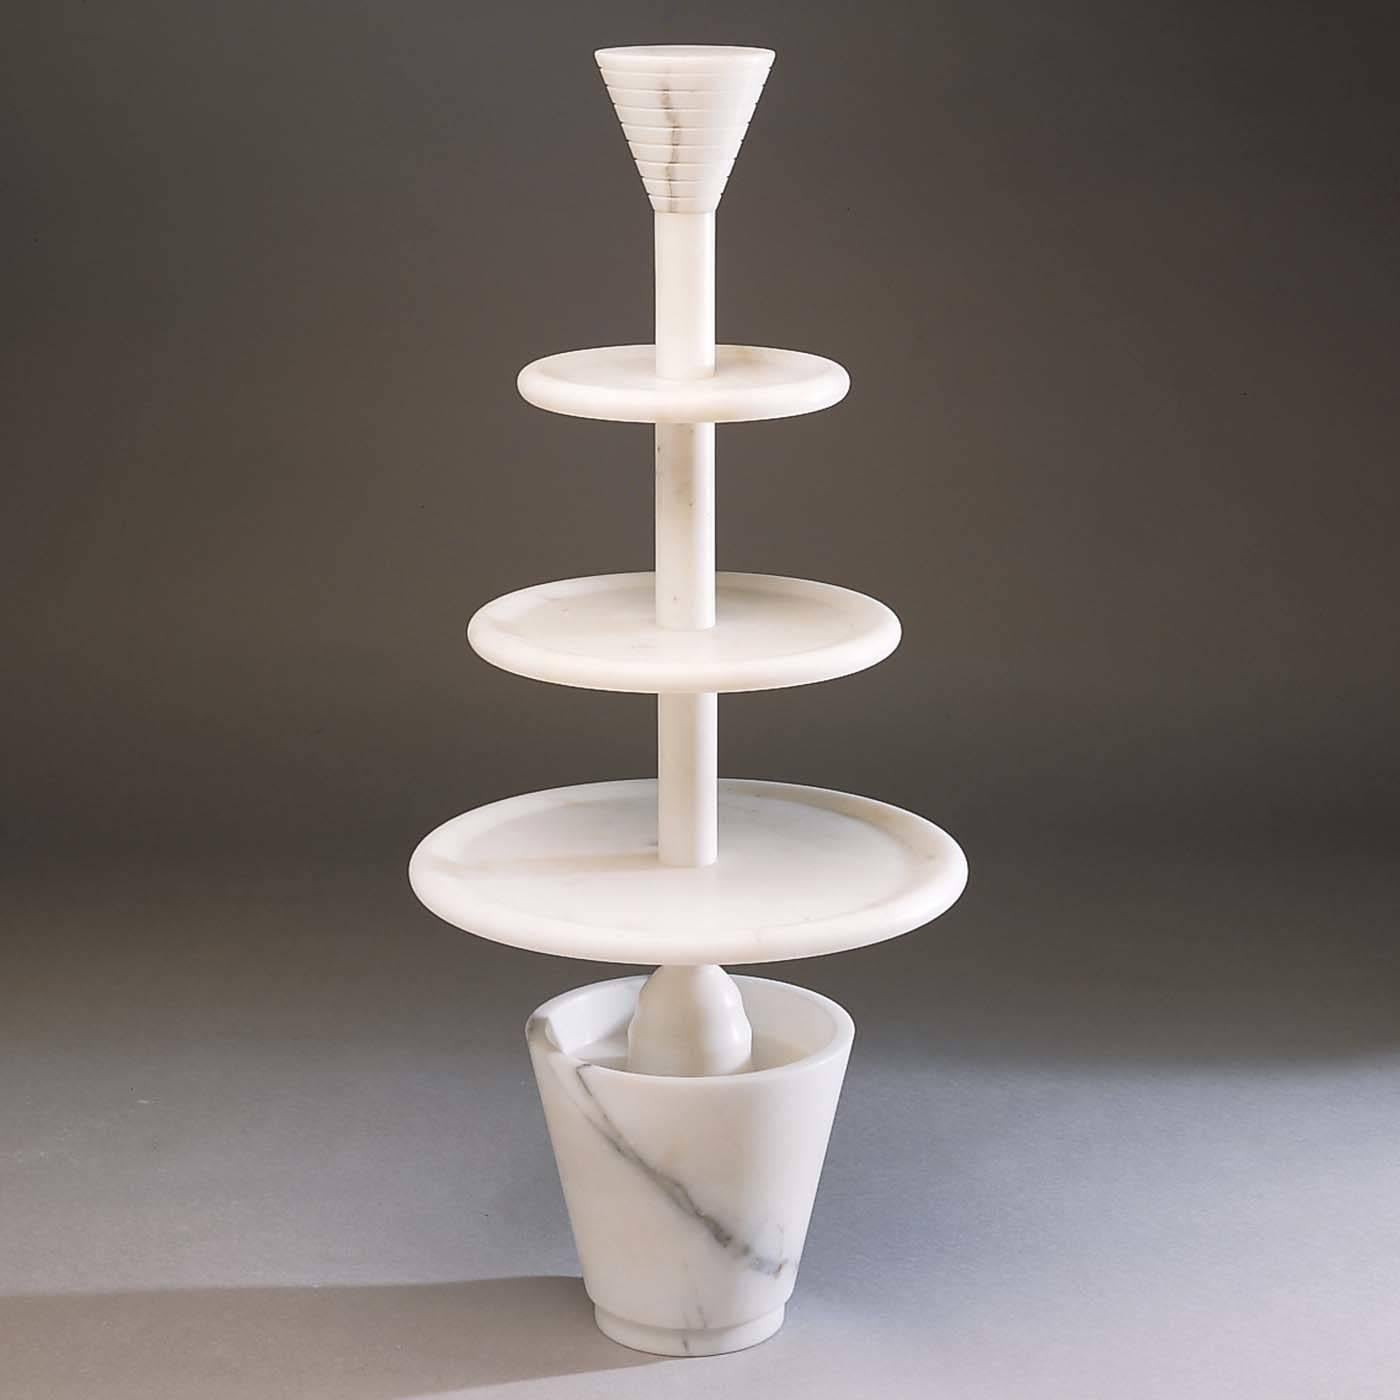 An immaculate design that conveys the high aesthetic quality of marble with its bare, monochromatic Silhouette. Designed by Ugo La Pietra in 1987, this striking three-tier cake stand is a unique way to serve hors d'oeuvres, fruit, or desserts in